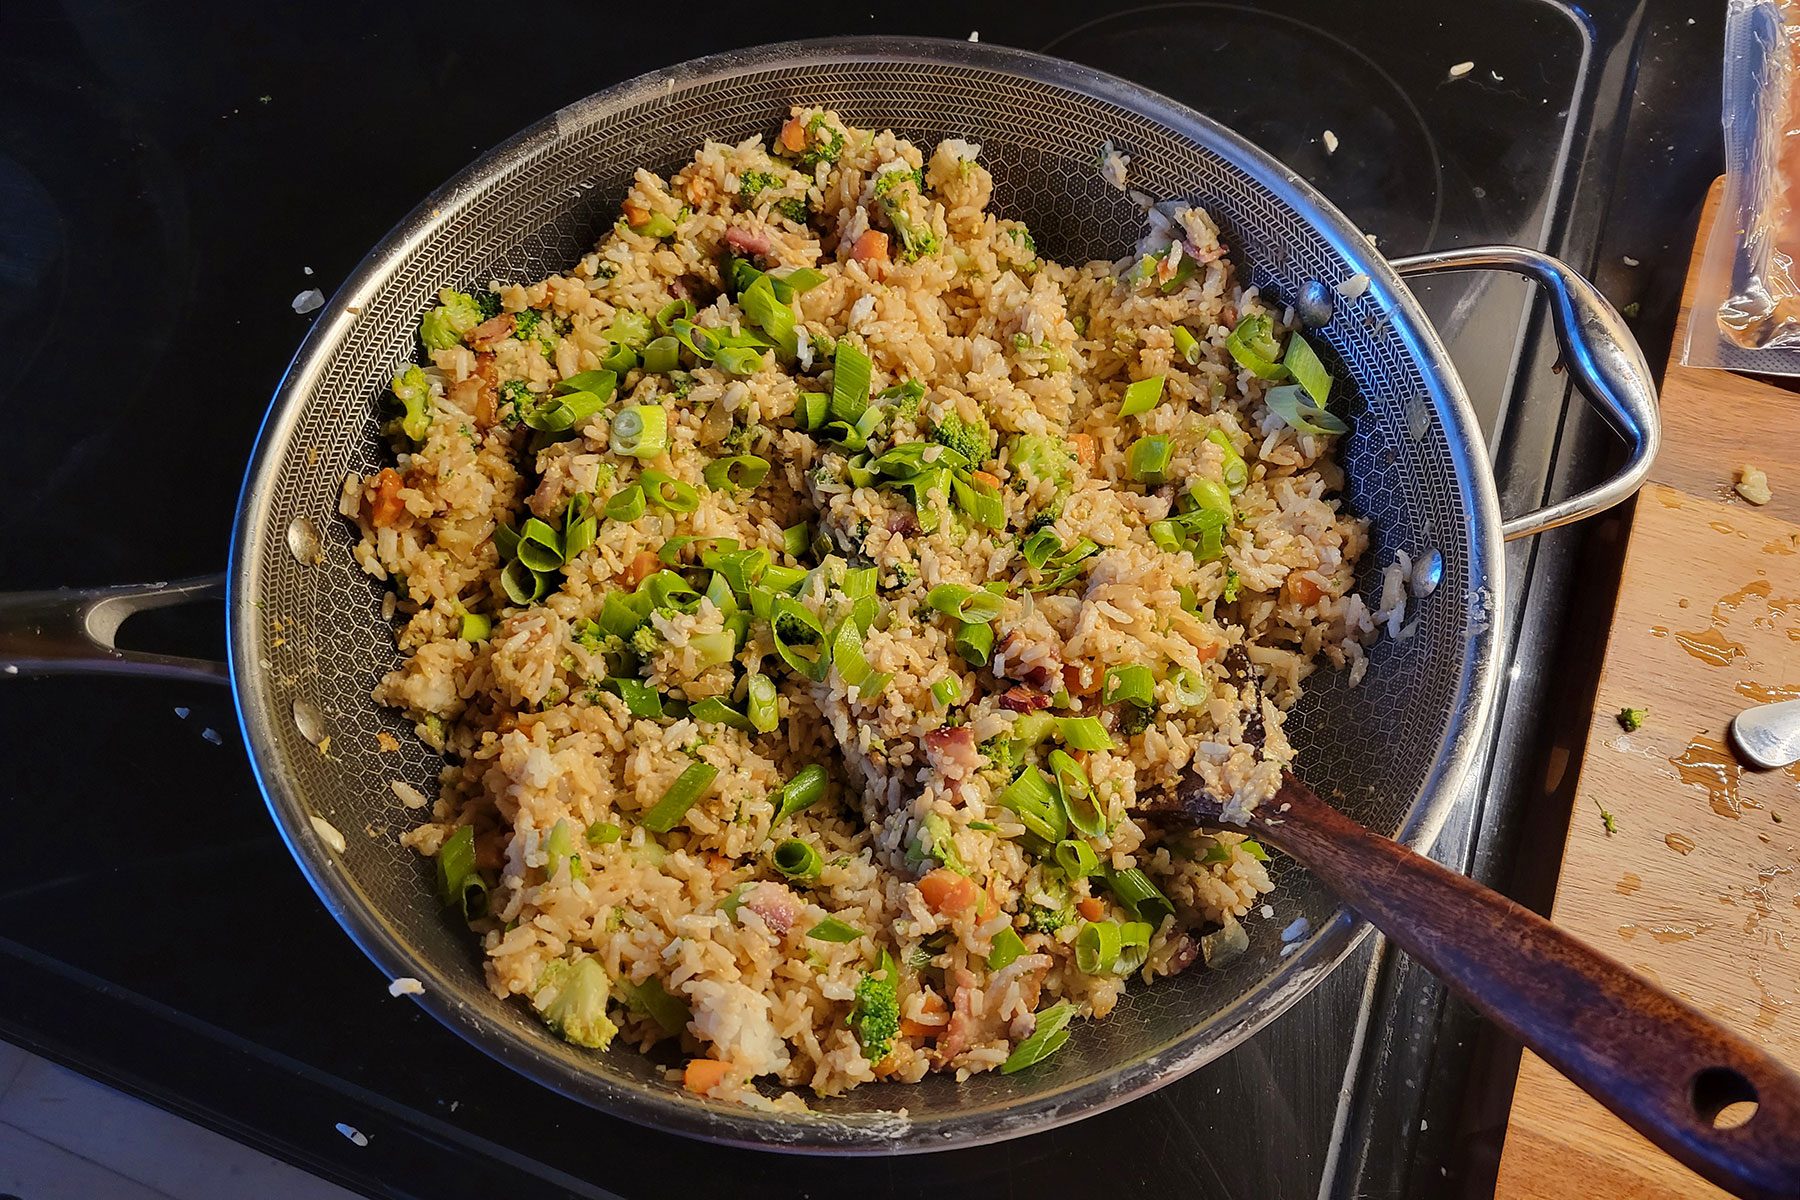 Review of #HEXCLAD 12 Hybrid Wok With Lid by Taylor, 36 votes